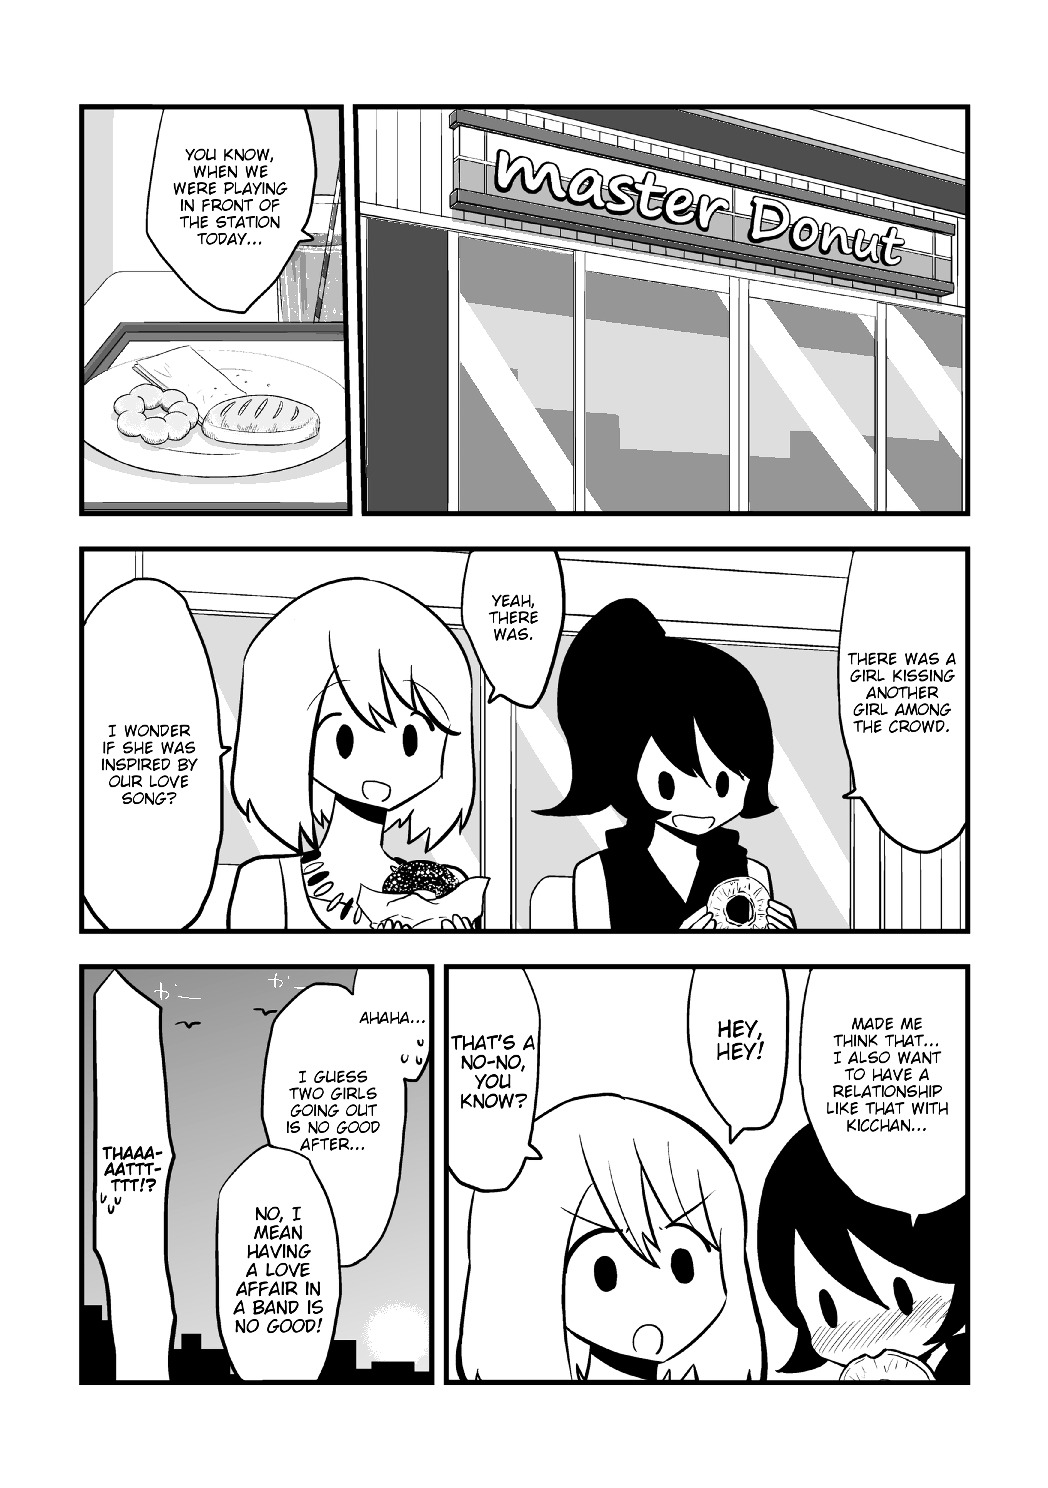 More Than Friends? - Page 1